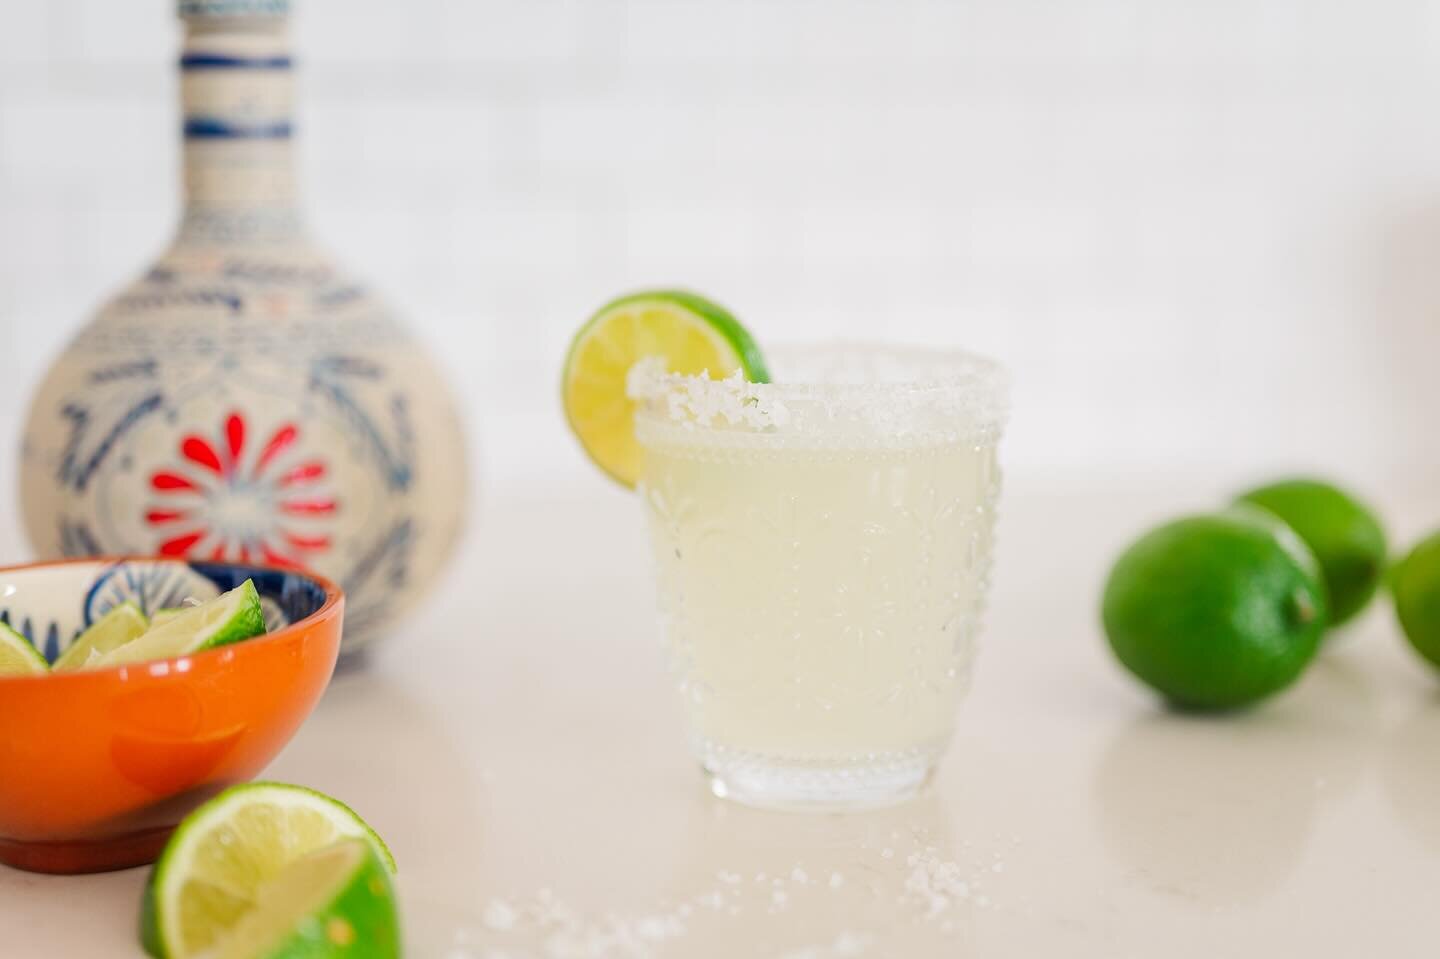 Hello friends!! Guess what? It&rsquo;s #nationalmargaritaday, do you love Margaritas? Let me know below - if not tell me what your favourite drink is? 🍹
.
.
.
.
.
#brandphotography #foodphotography #gtabrandphotographer #ontariobrandphotographer #li